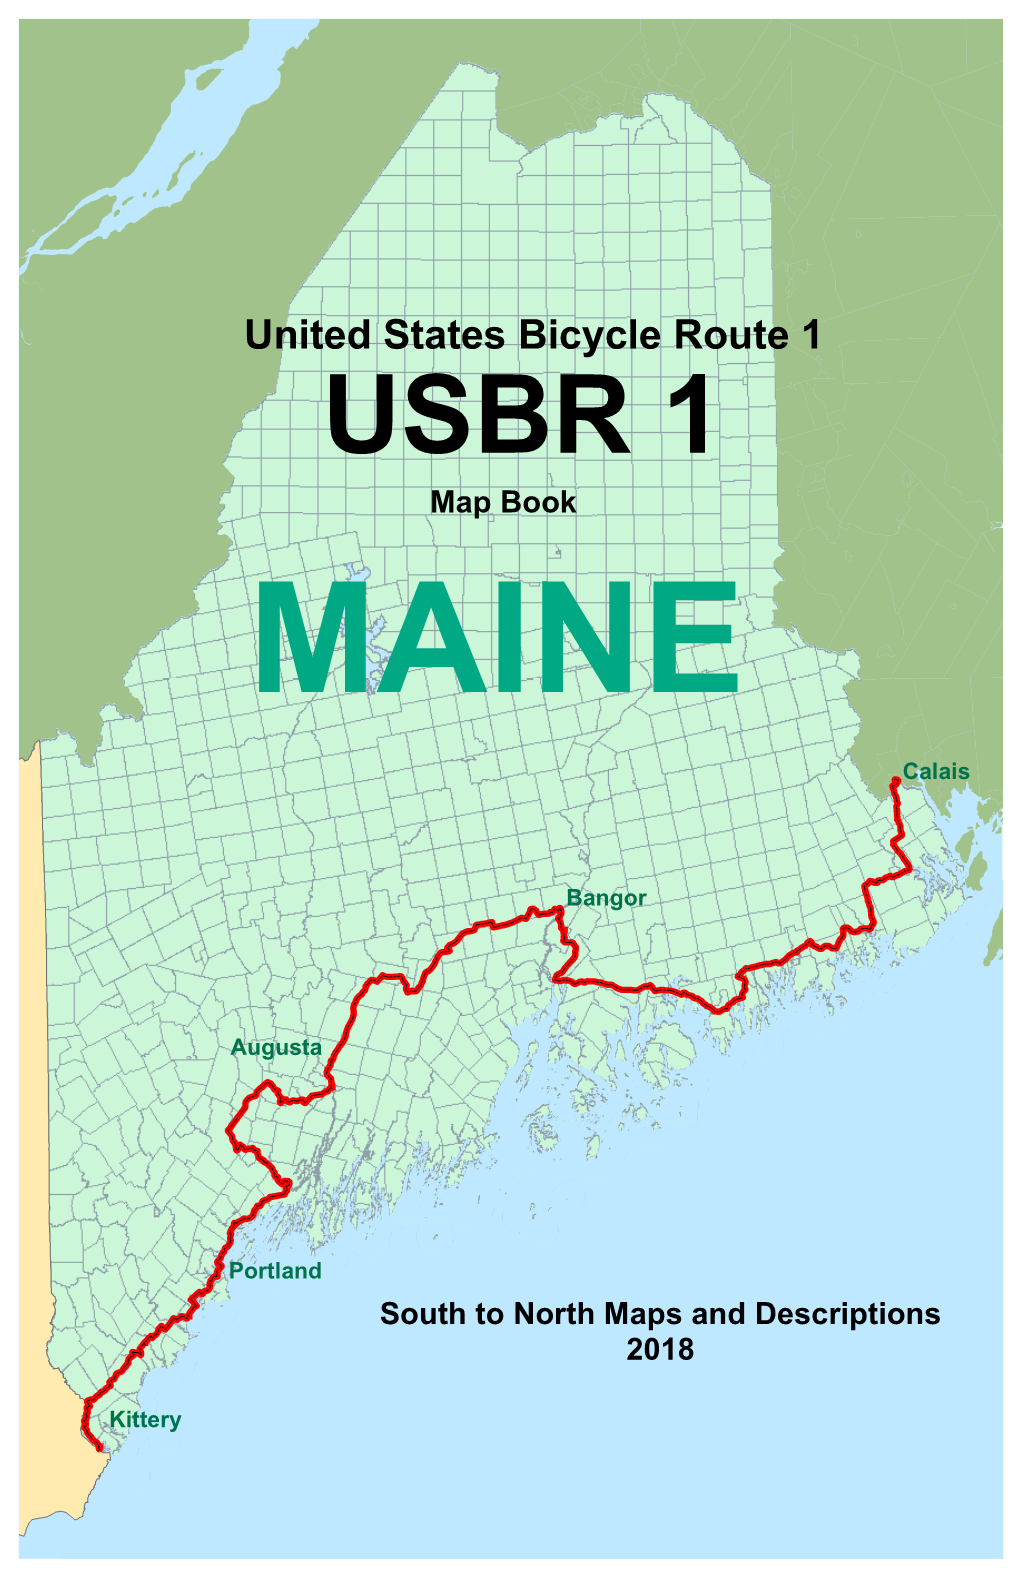 United States Bicycle Route 1 USBR 1 Map Book MAINE Calais